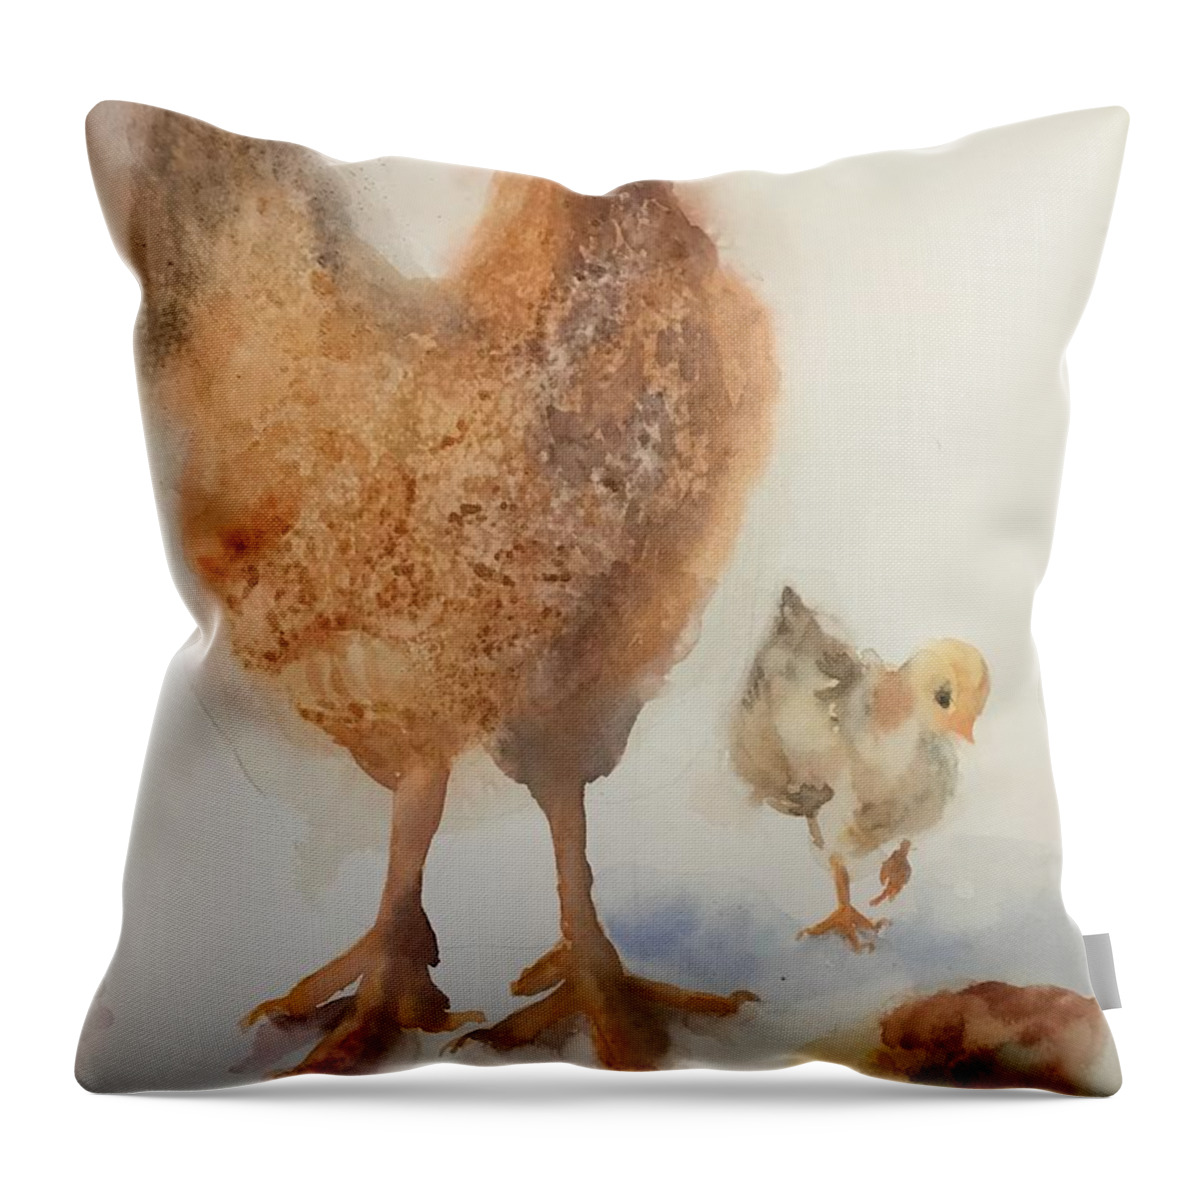 0342021 Throw Pillow featuring the painting 0342022 by Han in Huang wong